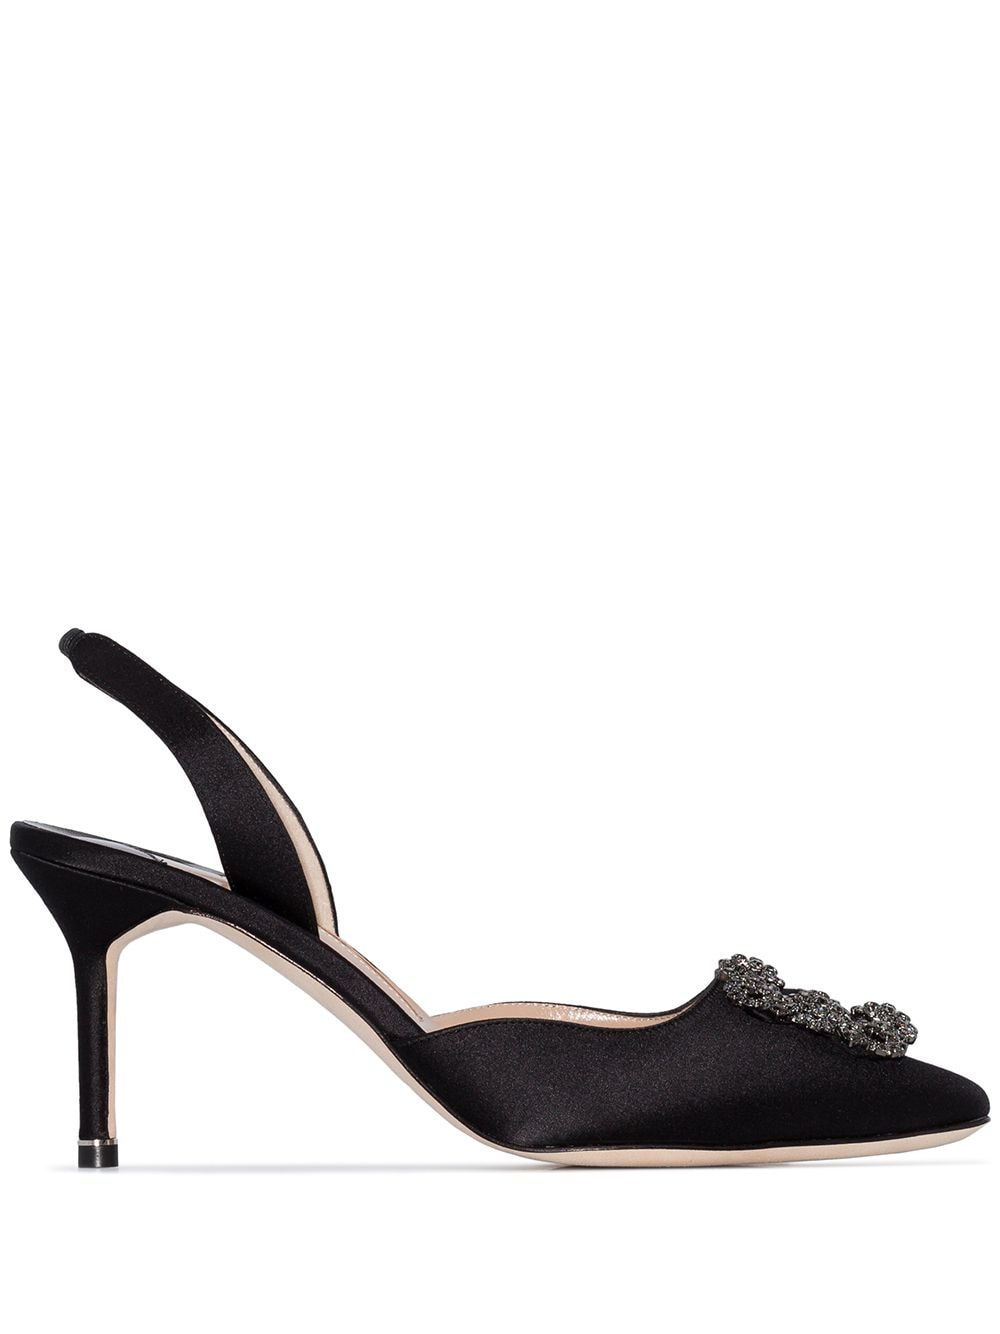 Manolo Blahnik - Hangisi 70Mm Slingback Pumps | ABOUT ICONS